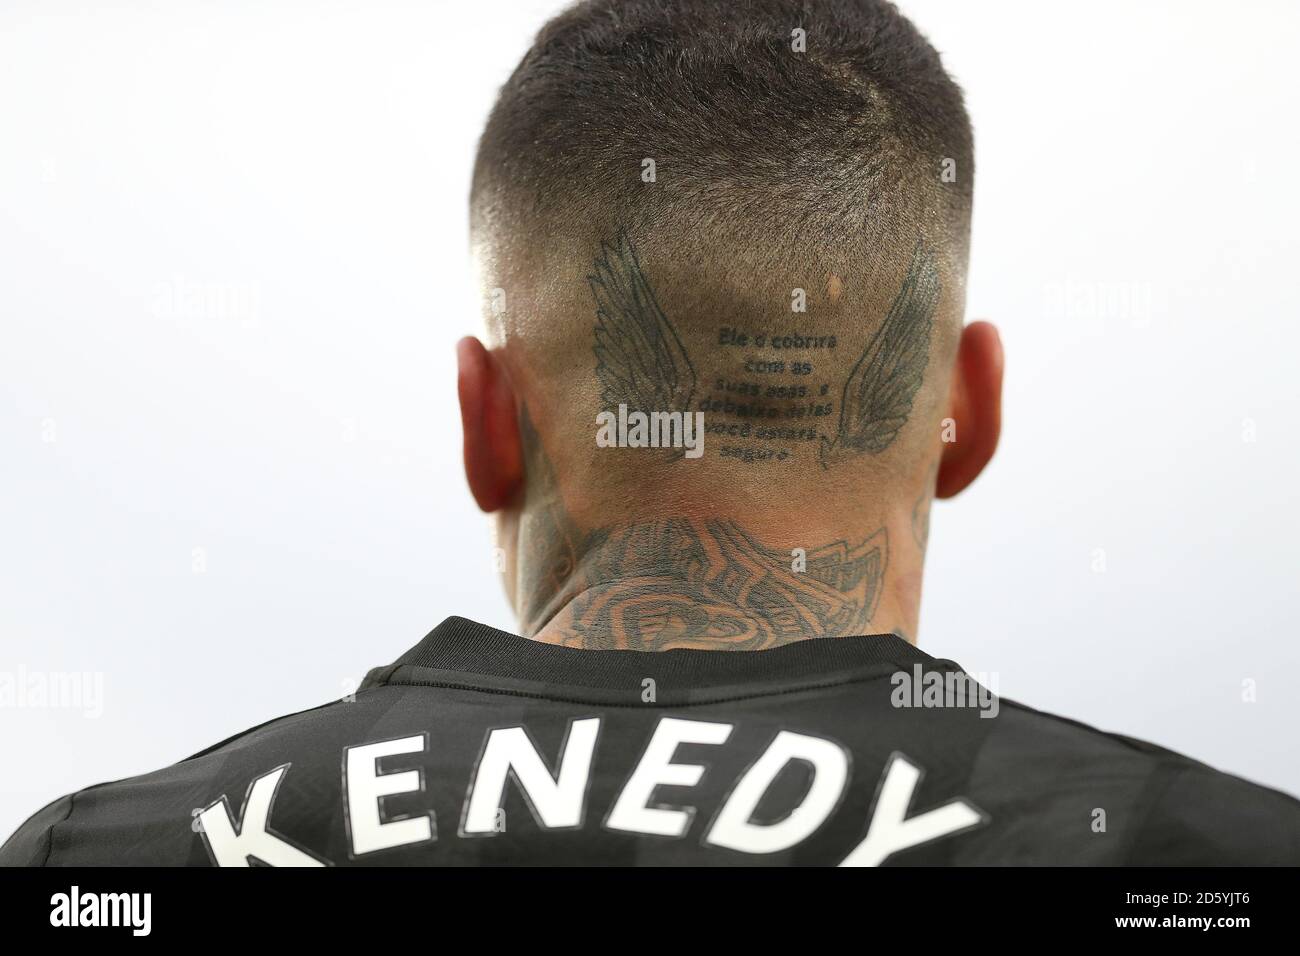 Usher has got a new neck and head tattoo  a geometric drawing on the back  of his head  Stuffconz